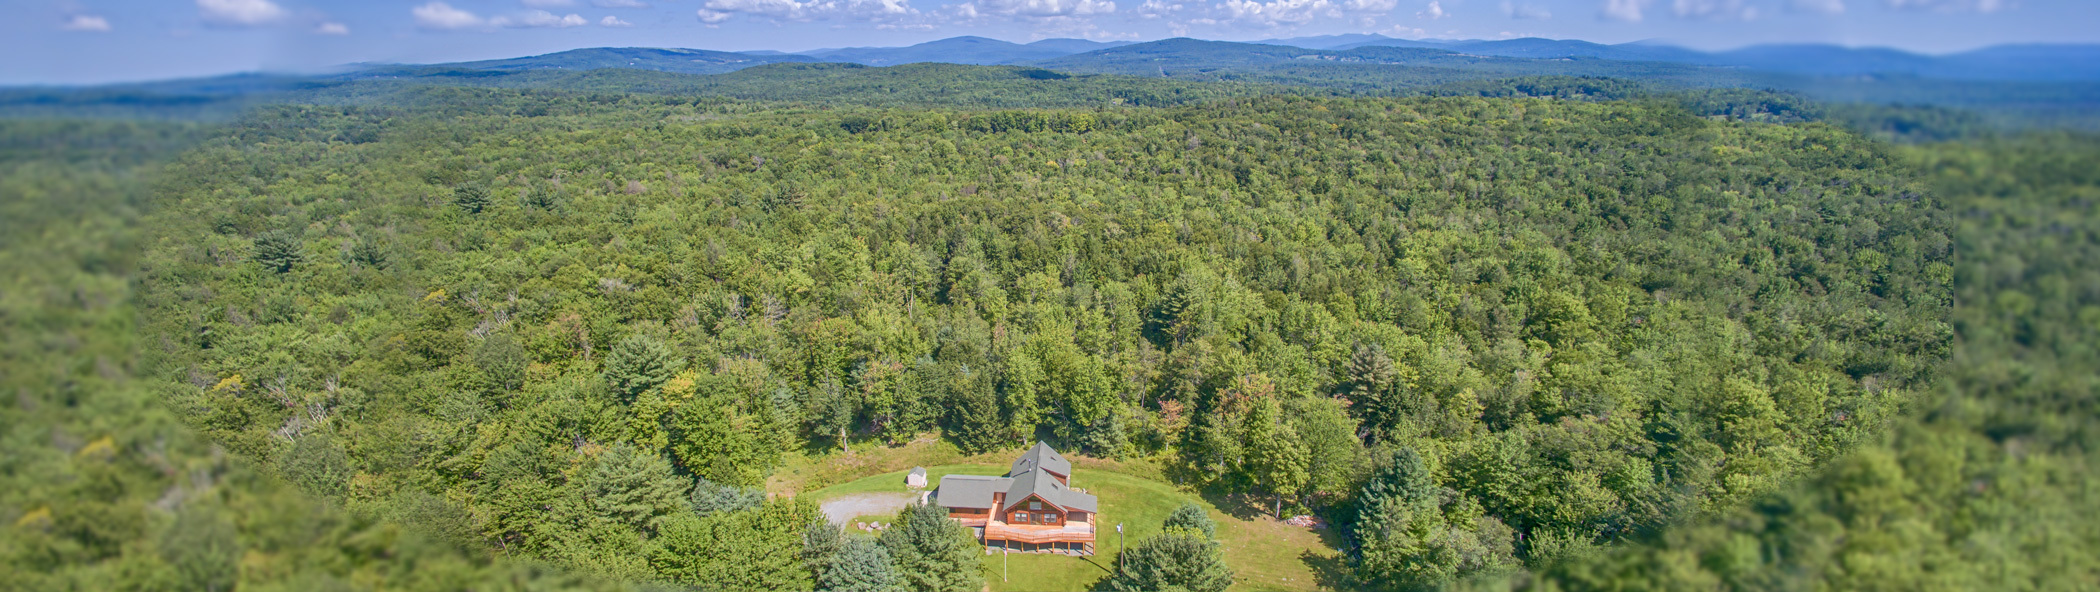 Hudson Valley Log Homes and Log Cabins For Sale